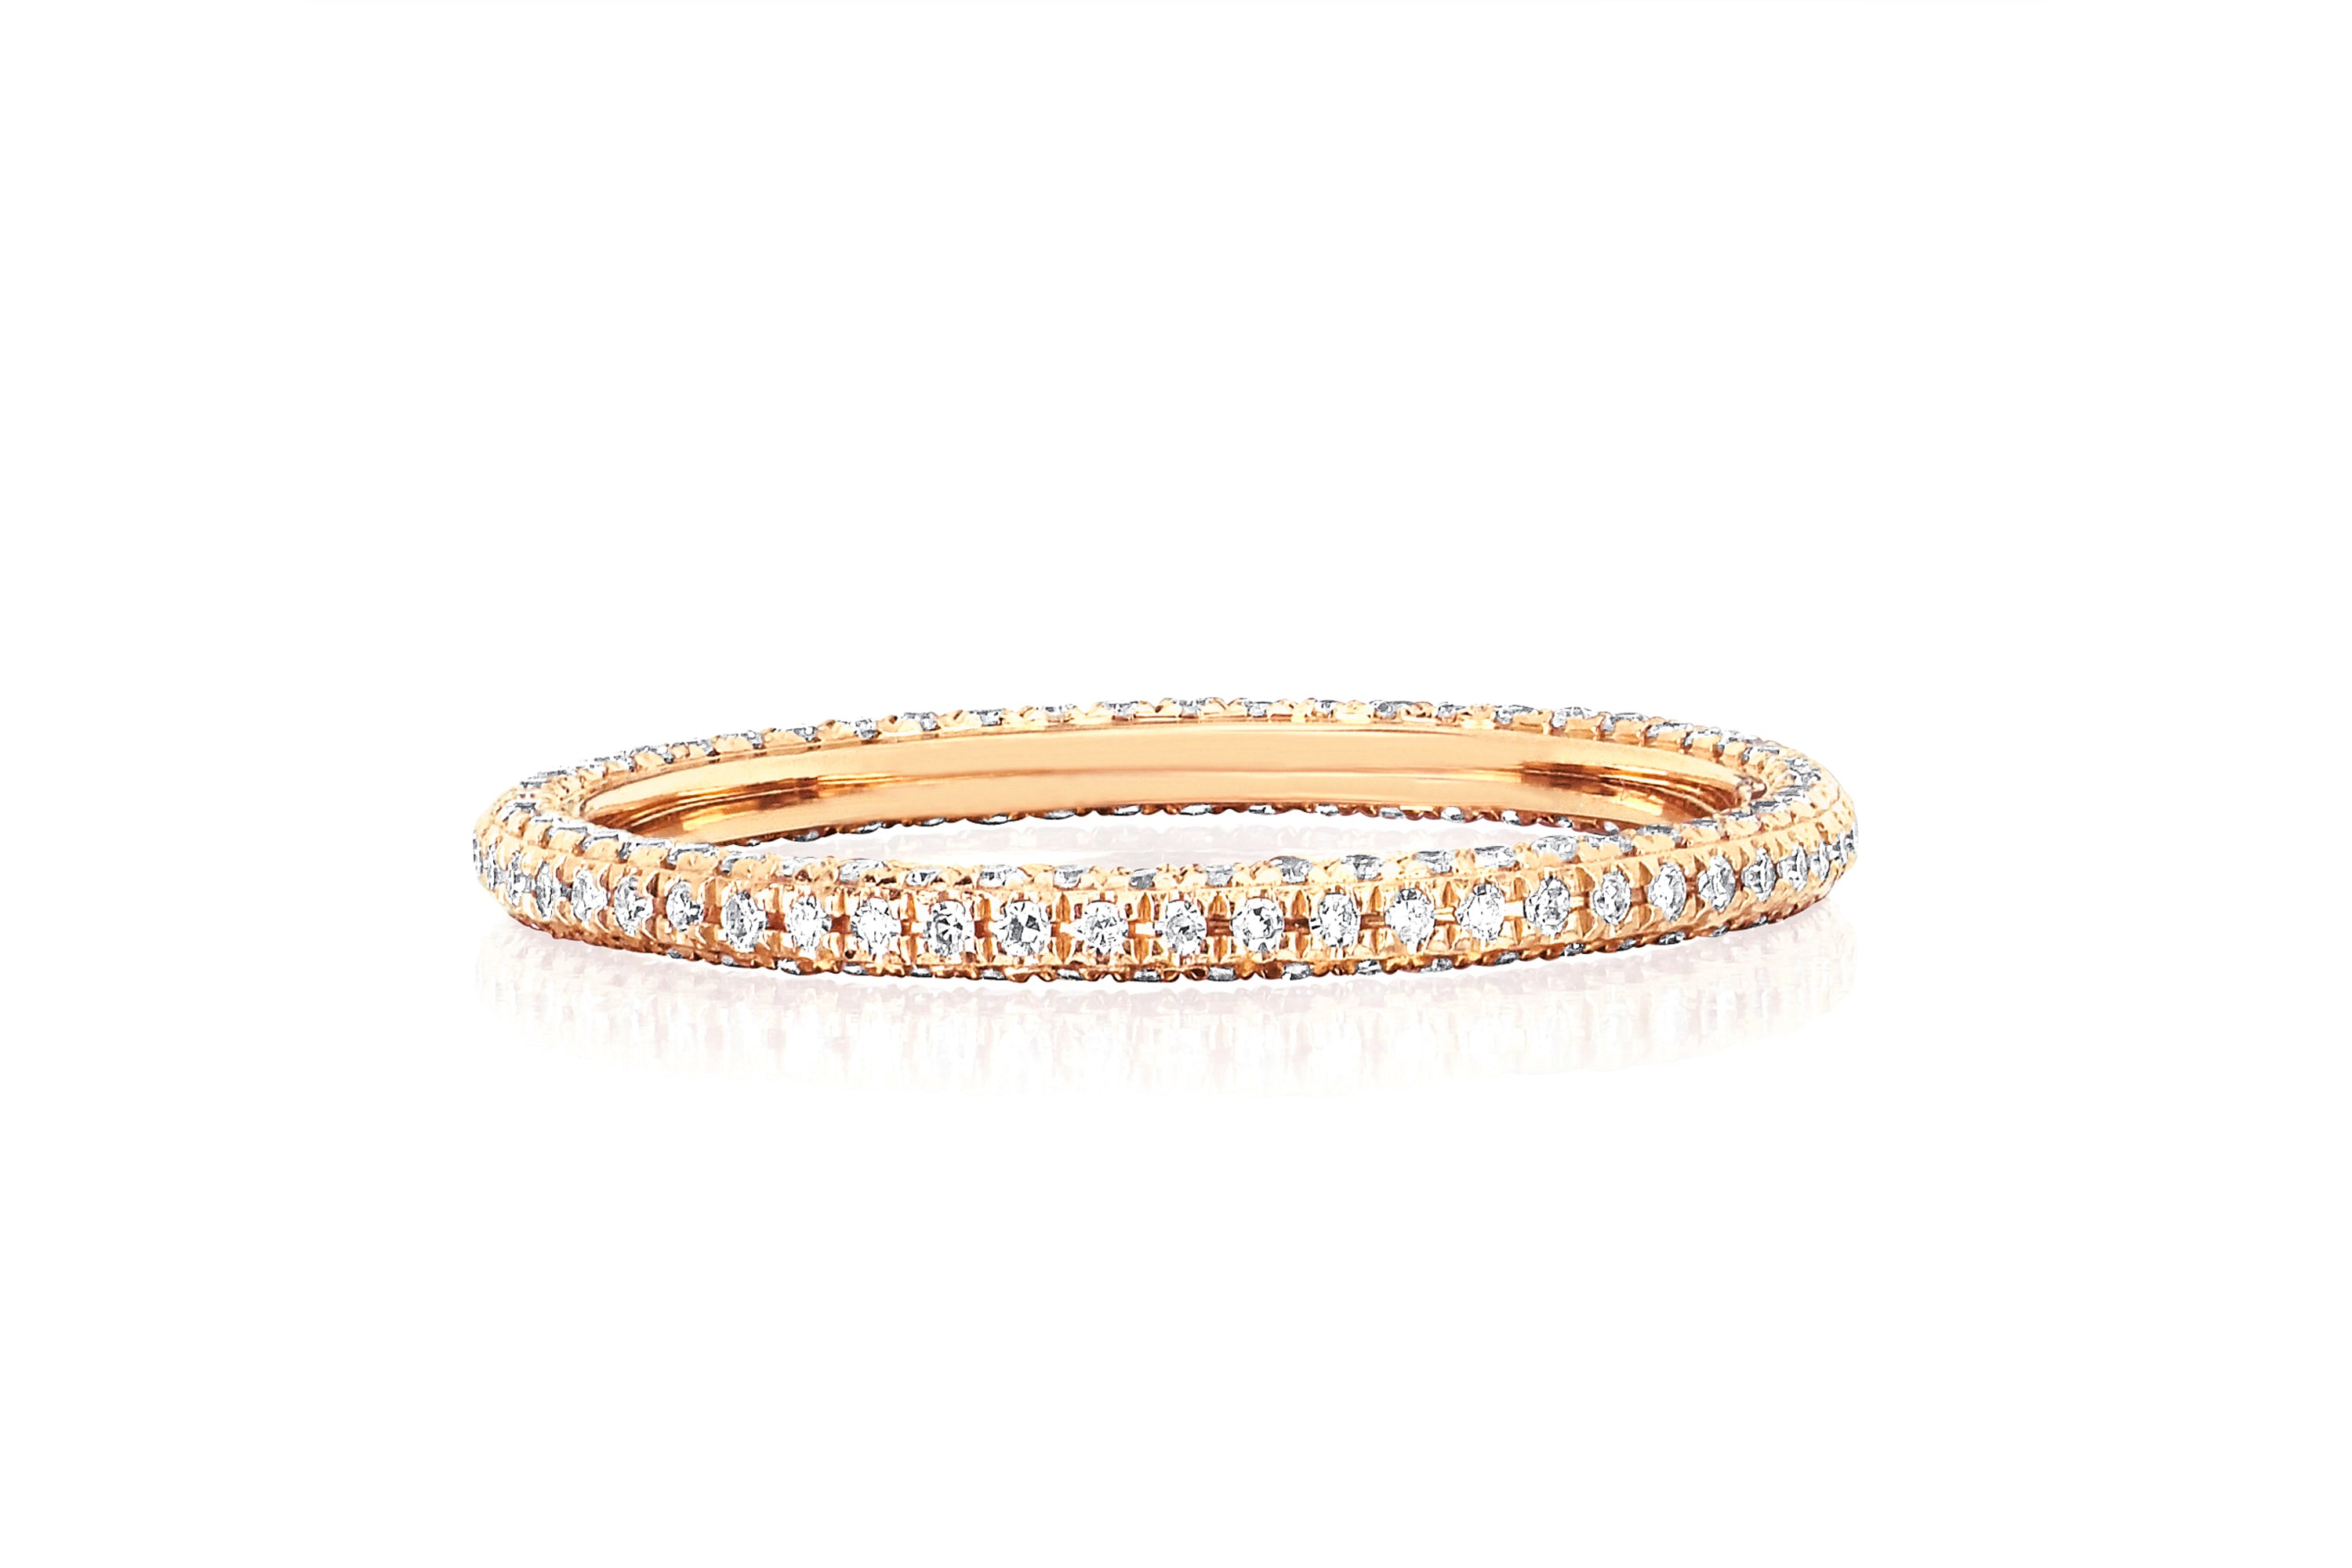 3 Sided Diamond Eternity Band Ring in 14k yellow gold